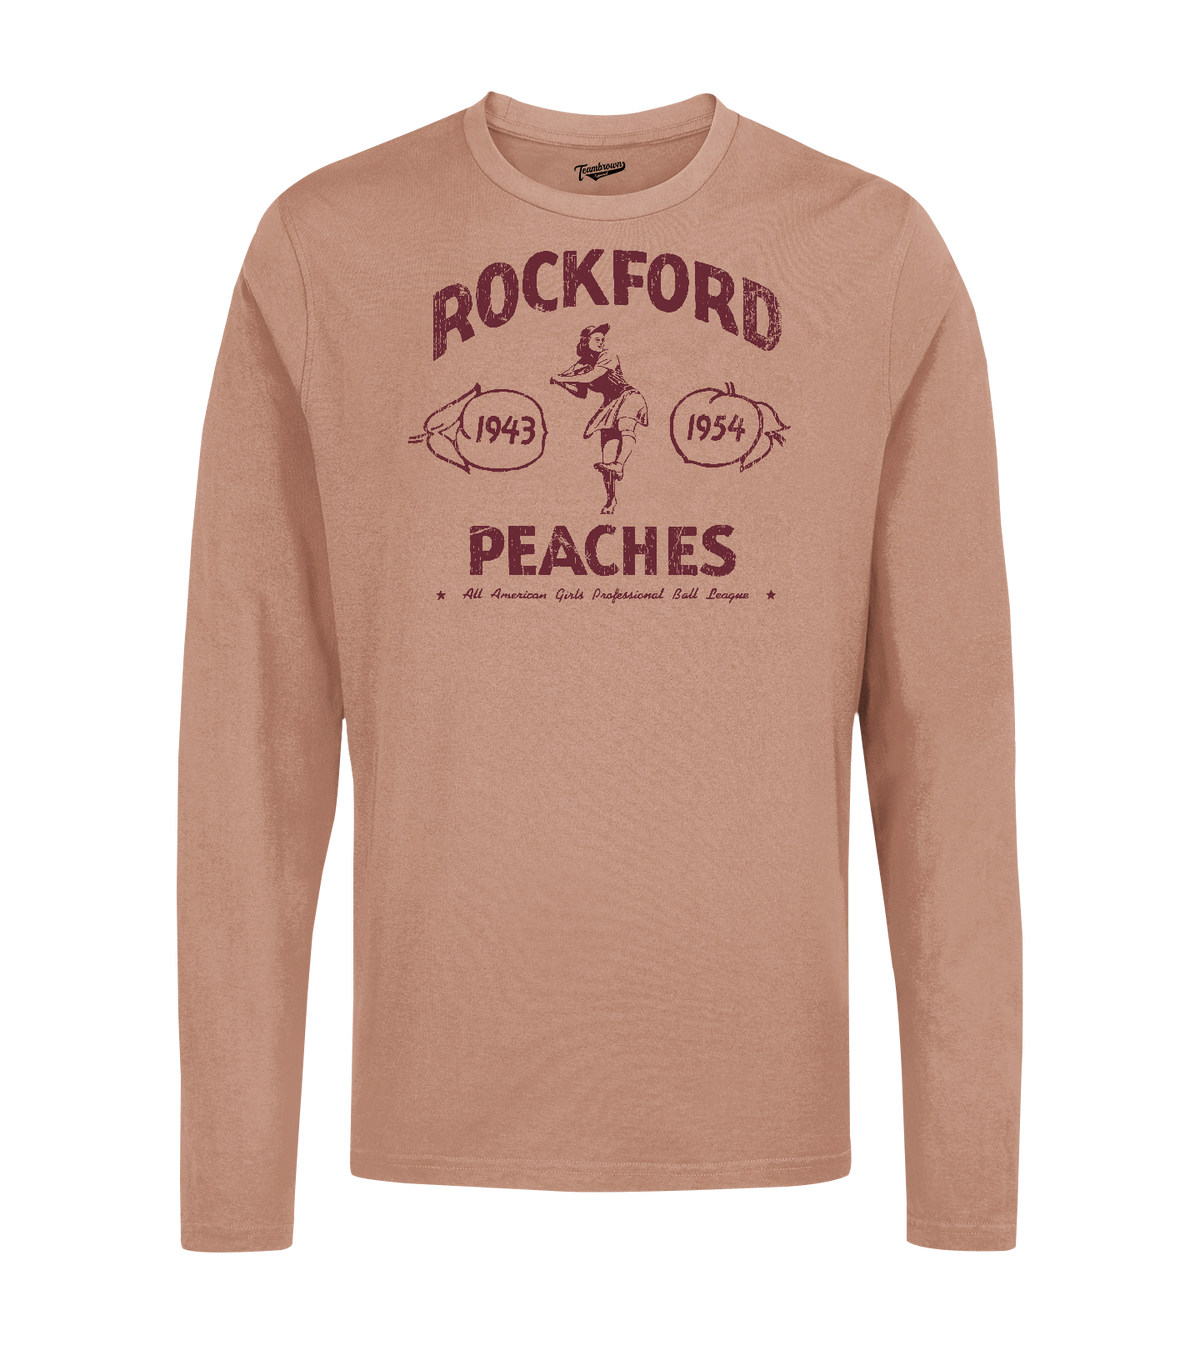 Rockford Peaches Program - Unisex Long Sleeve Crew T-Shirt | Officially Licensed - AAGPBL